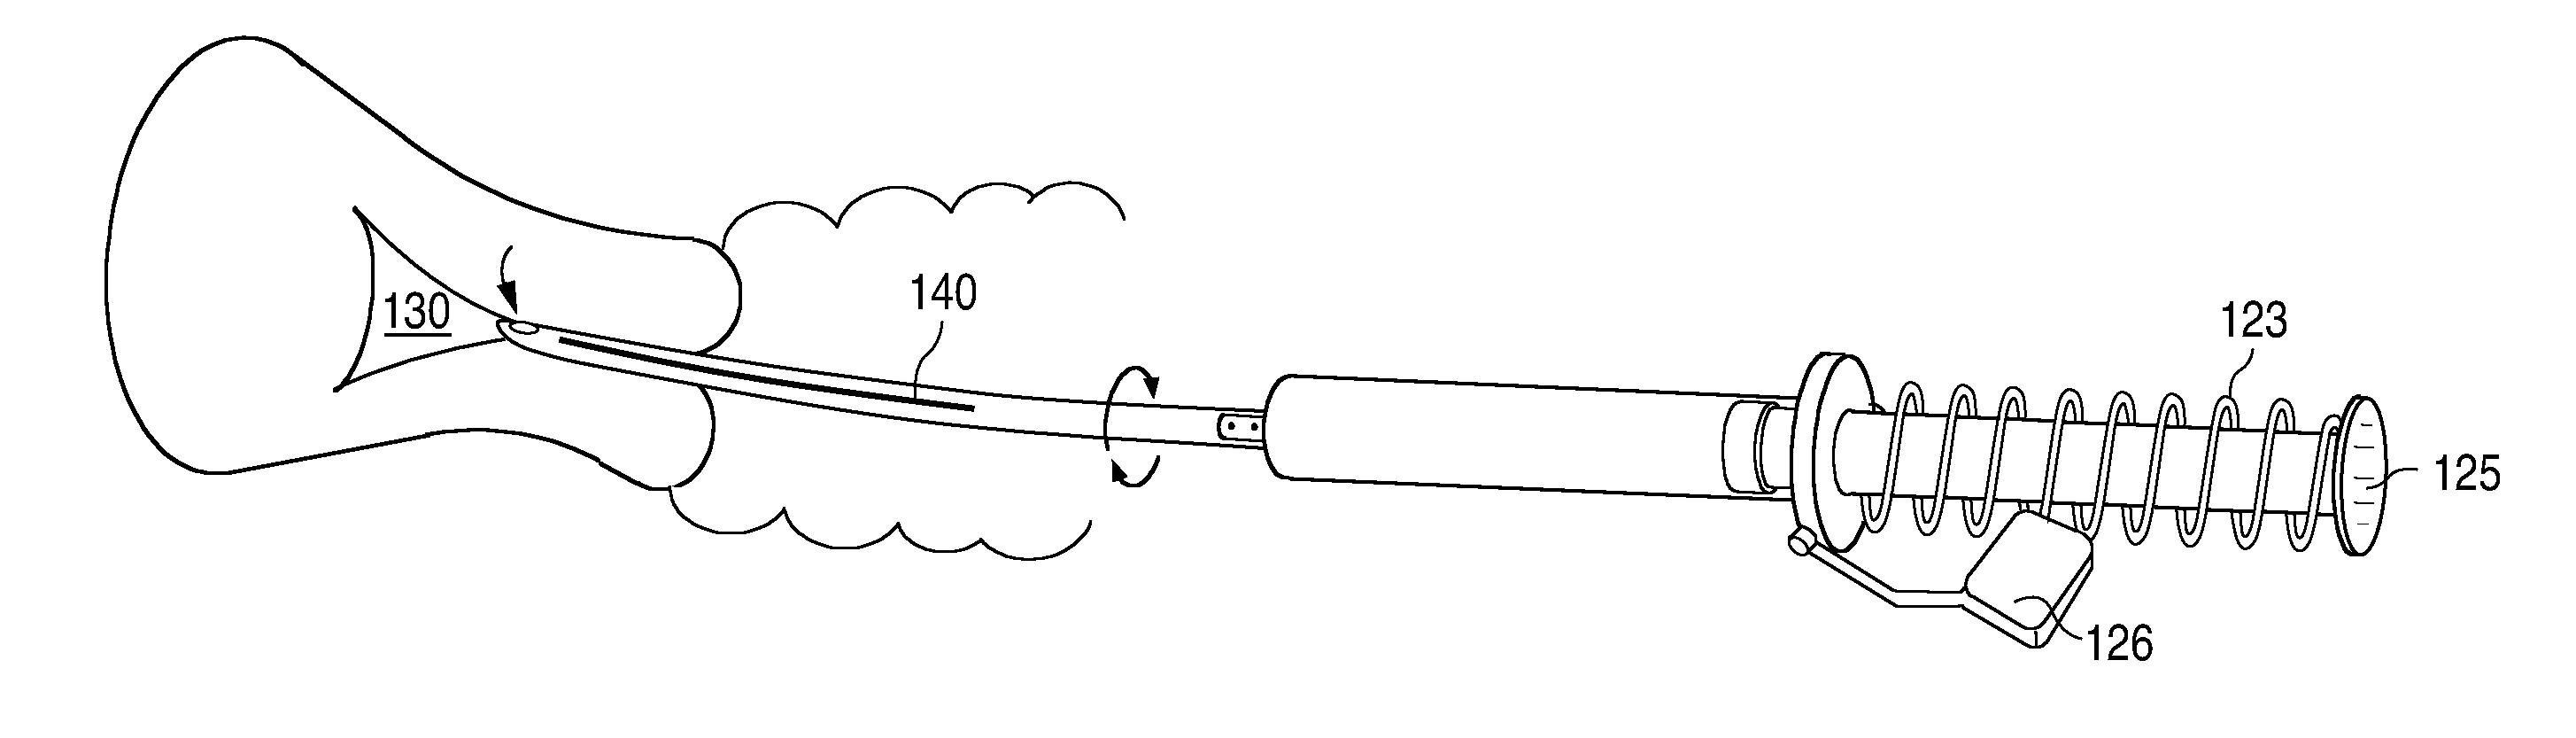 Biopsy device with automatic aspiration